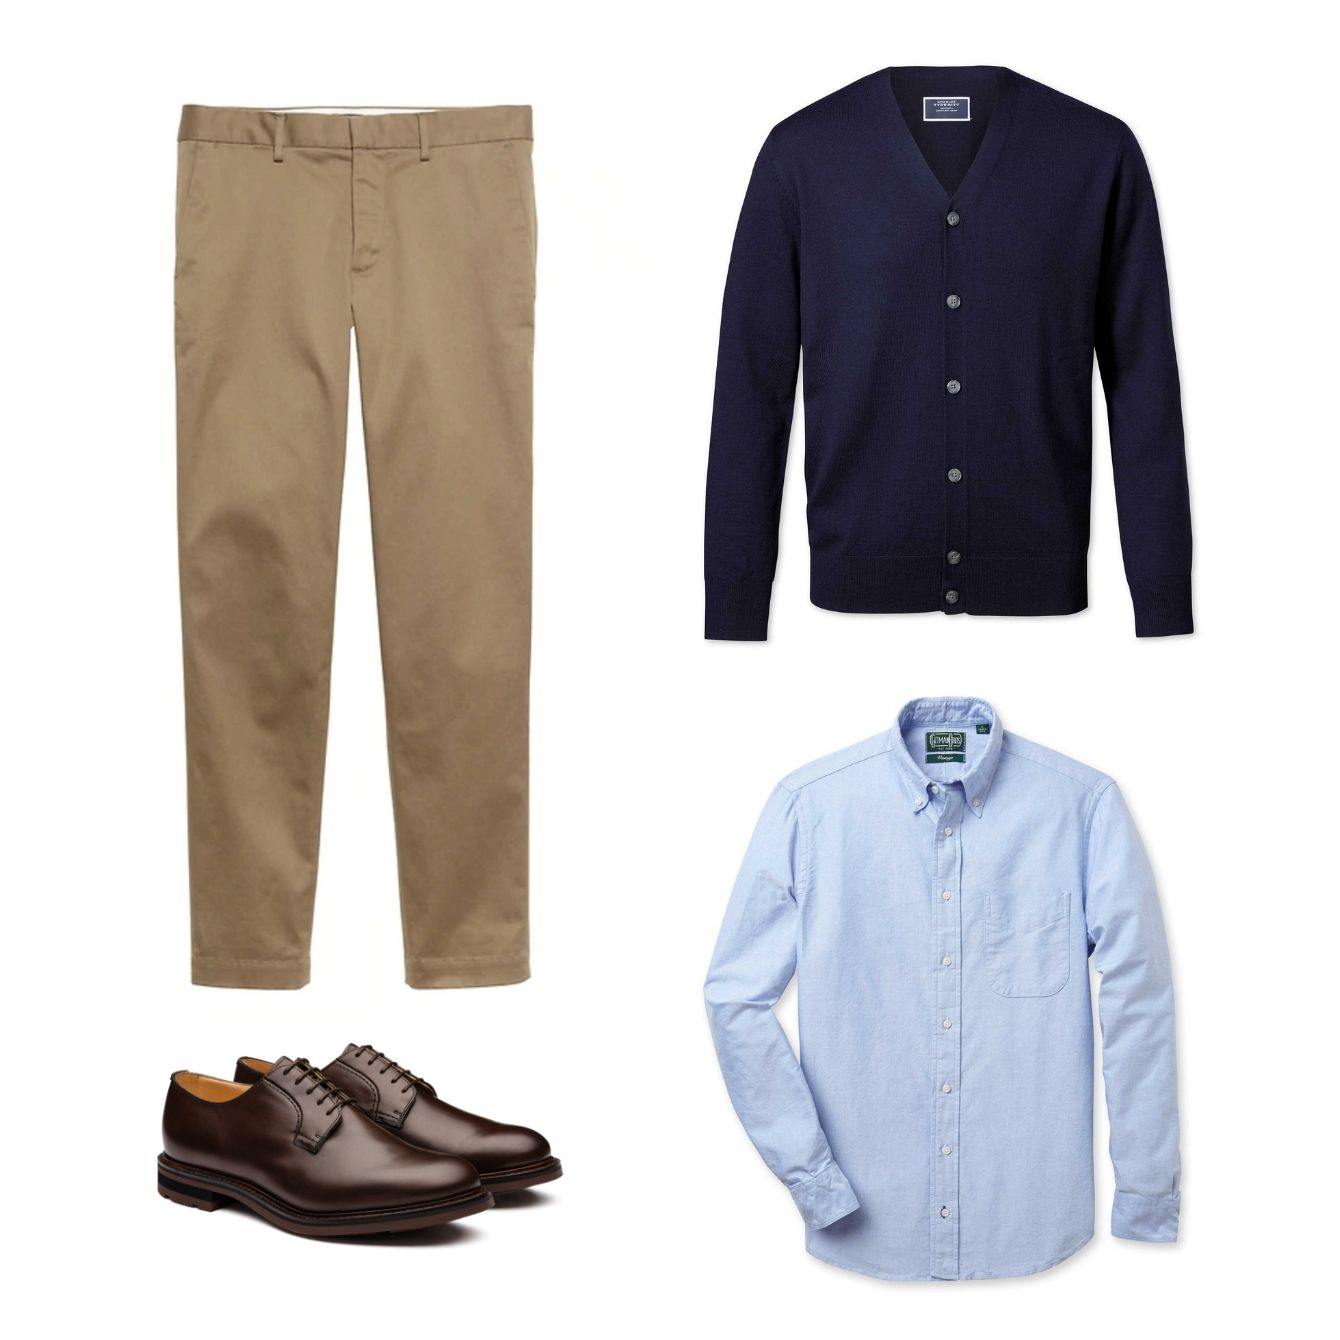 shoes to wear for business casual